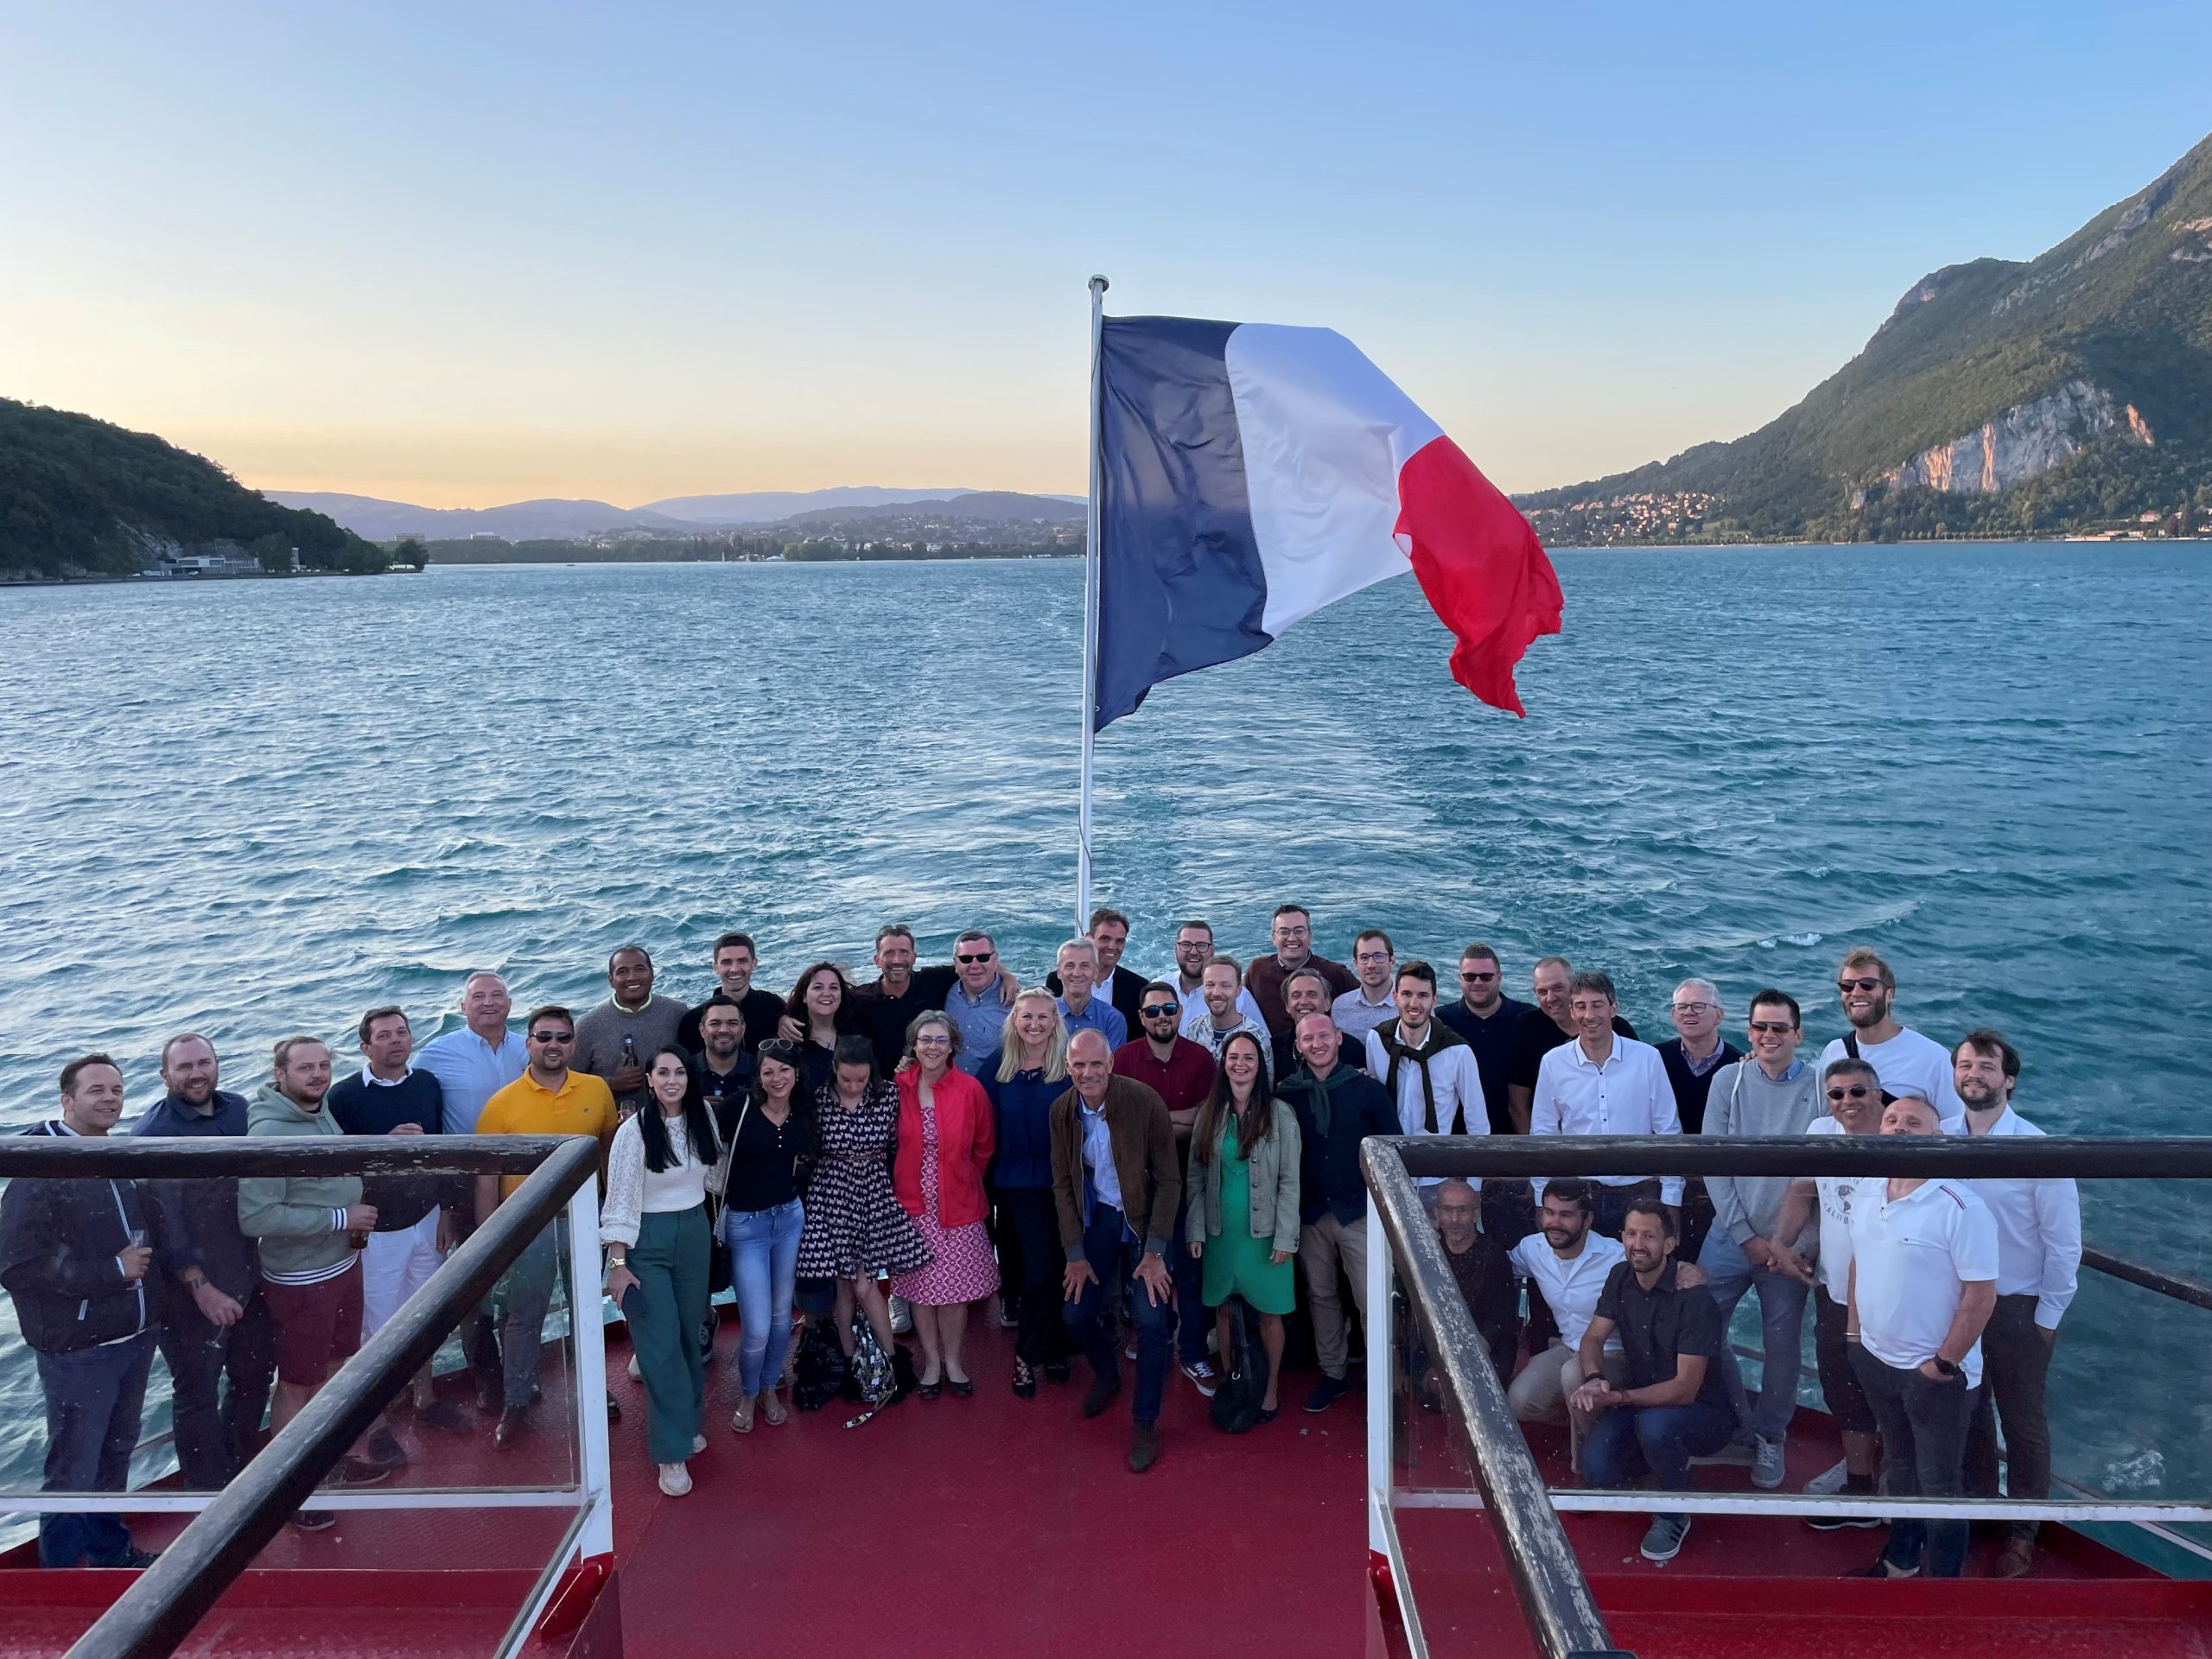 REAZN Employees with French flag and nature scenery